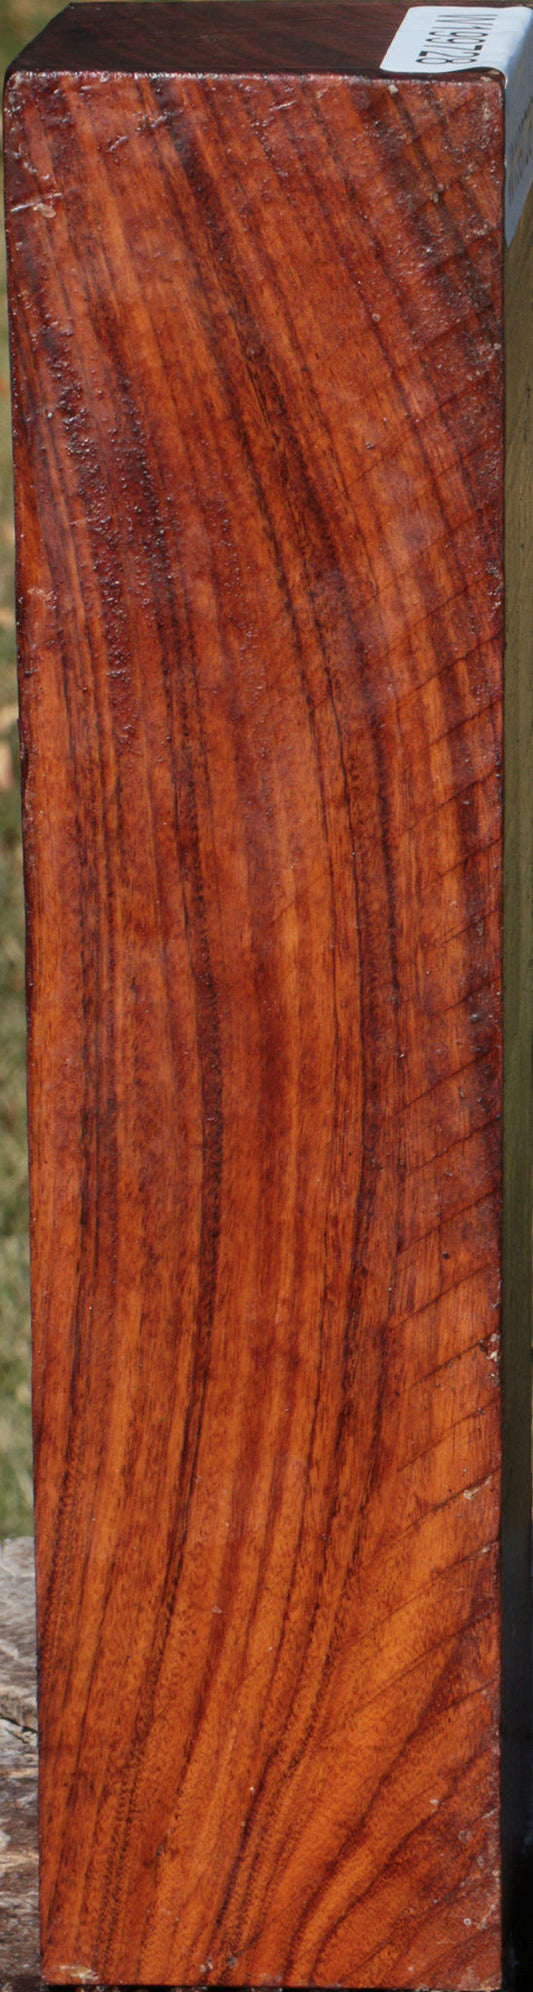 Bolivian Rosewood Peppermill